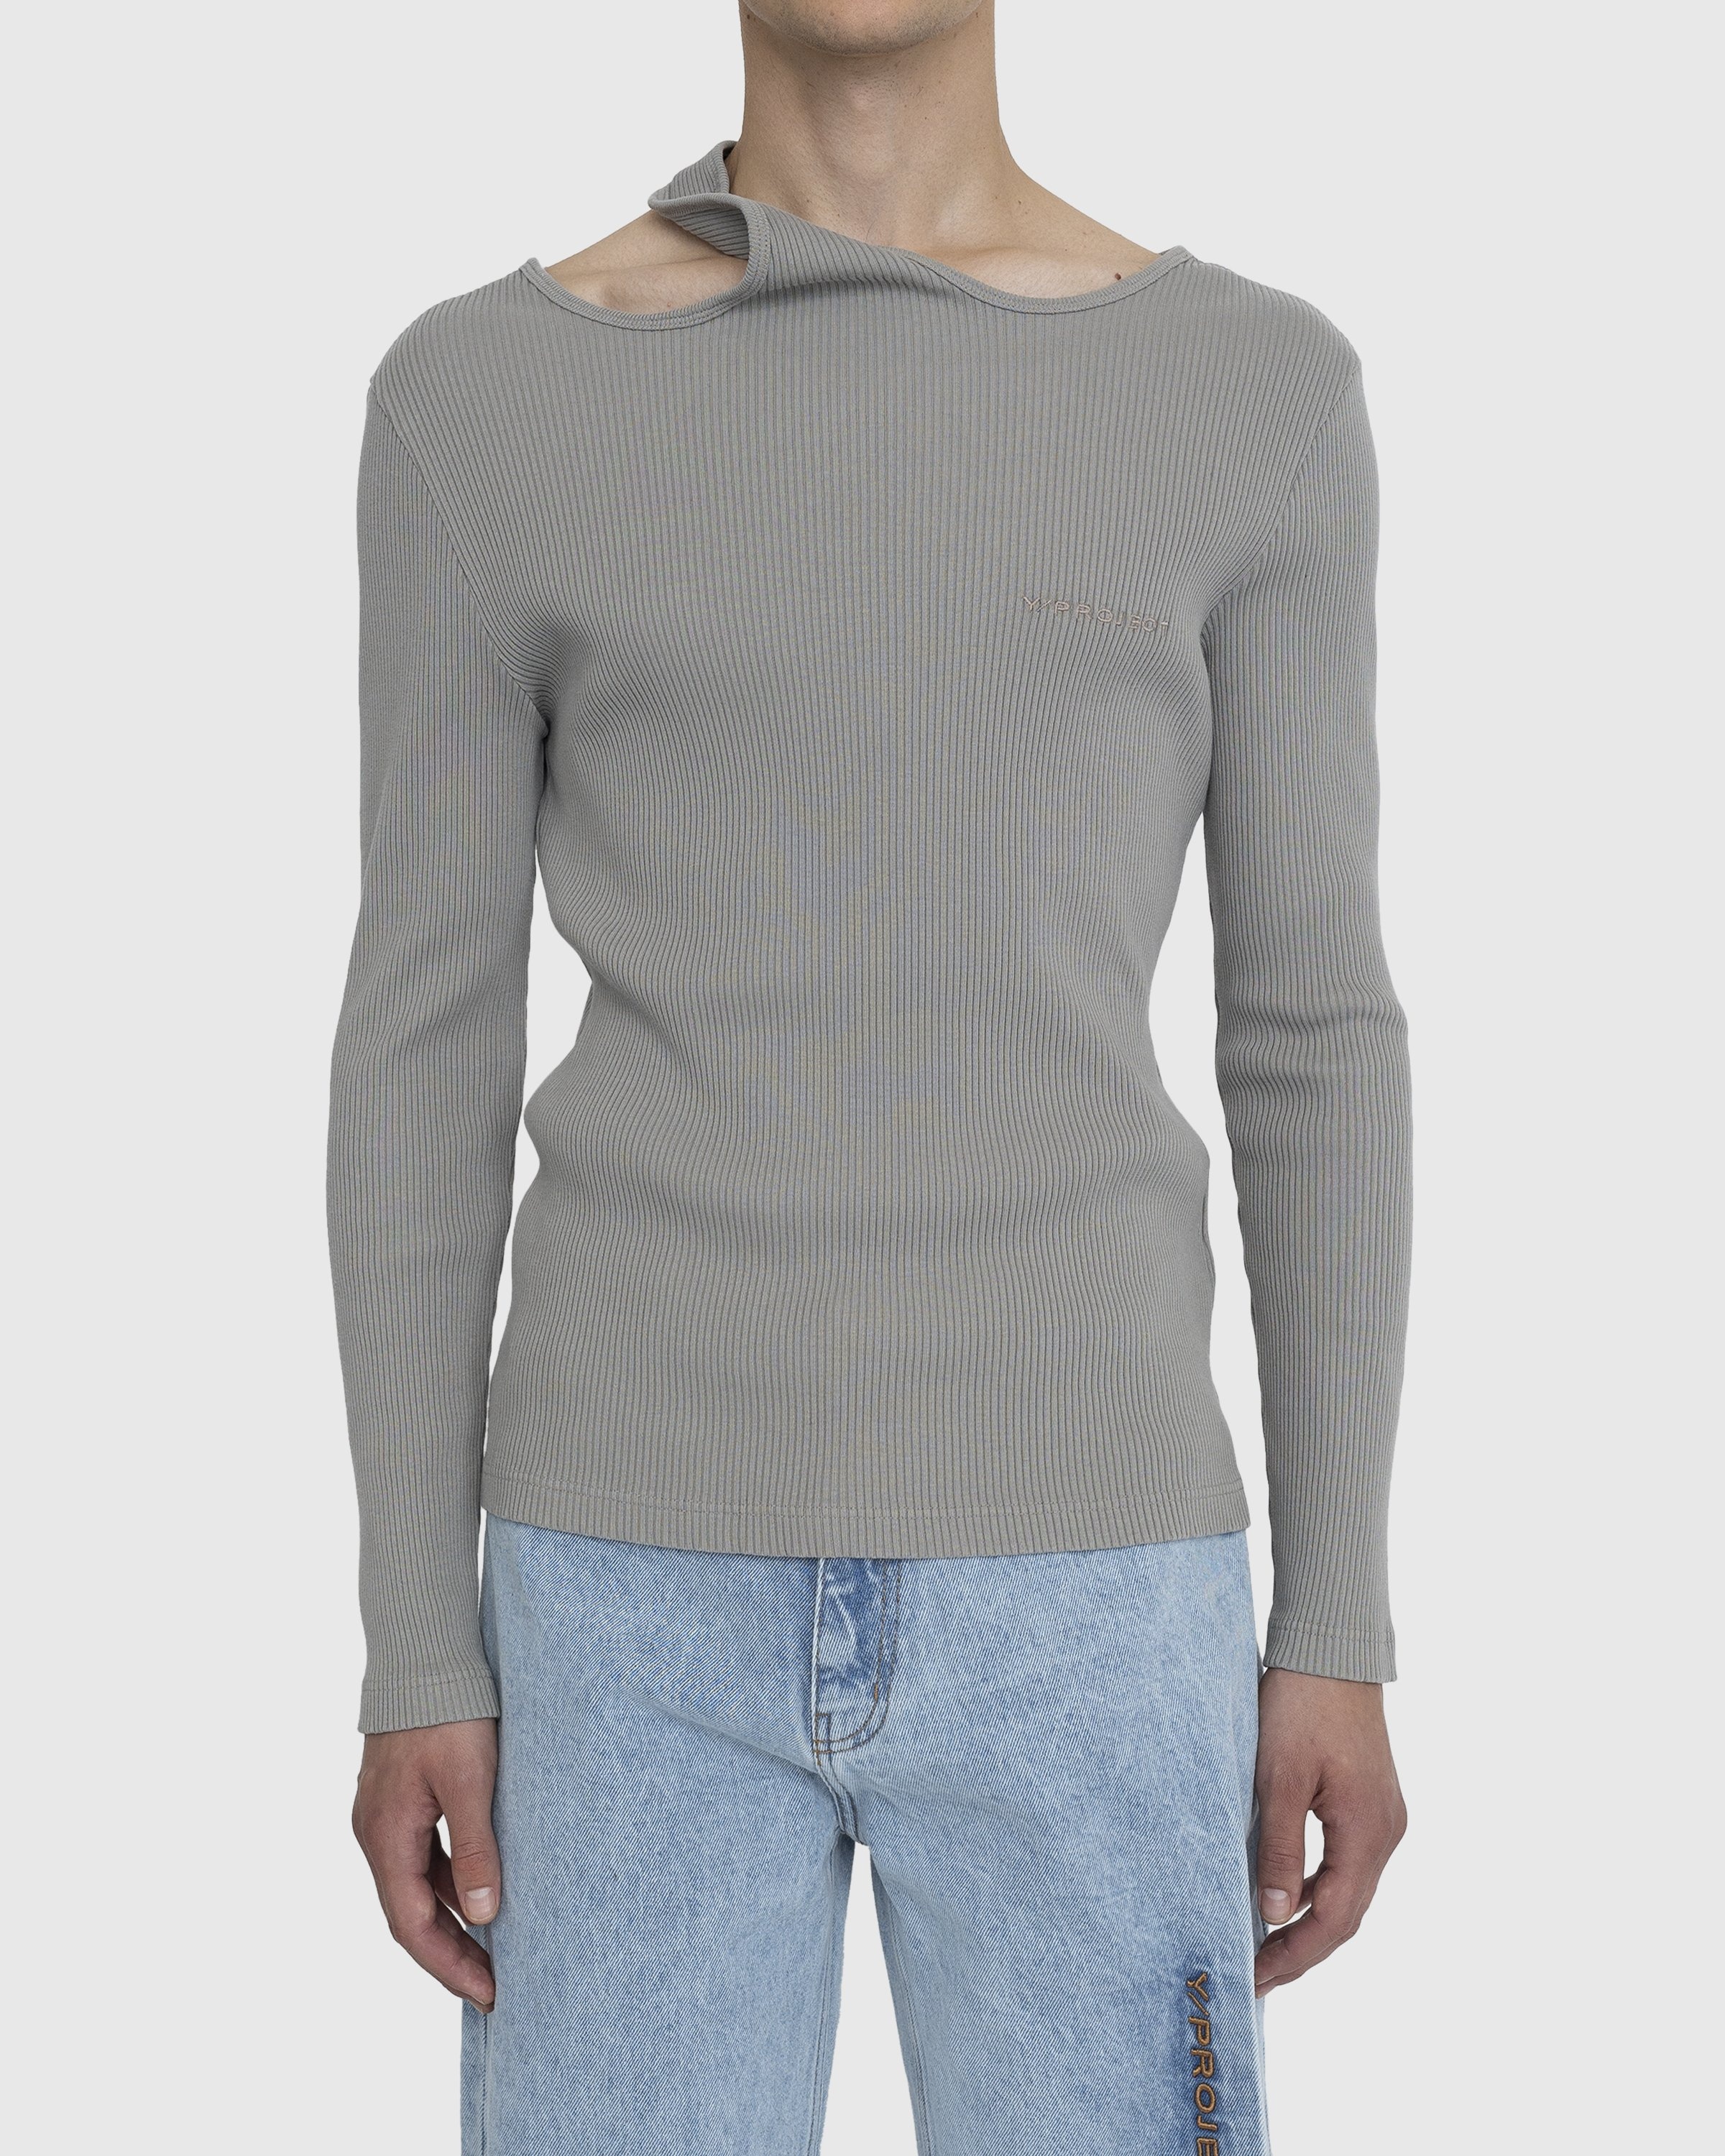 Y/Project – Classic Double Collar T-Shirt Taupe - Tops - Grey - Image 2